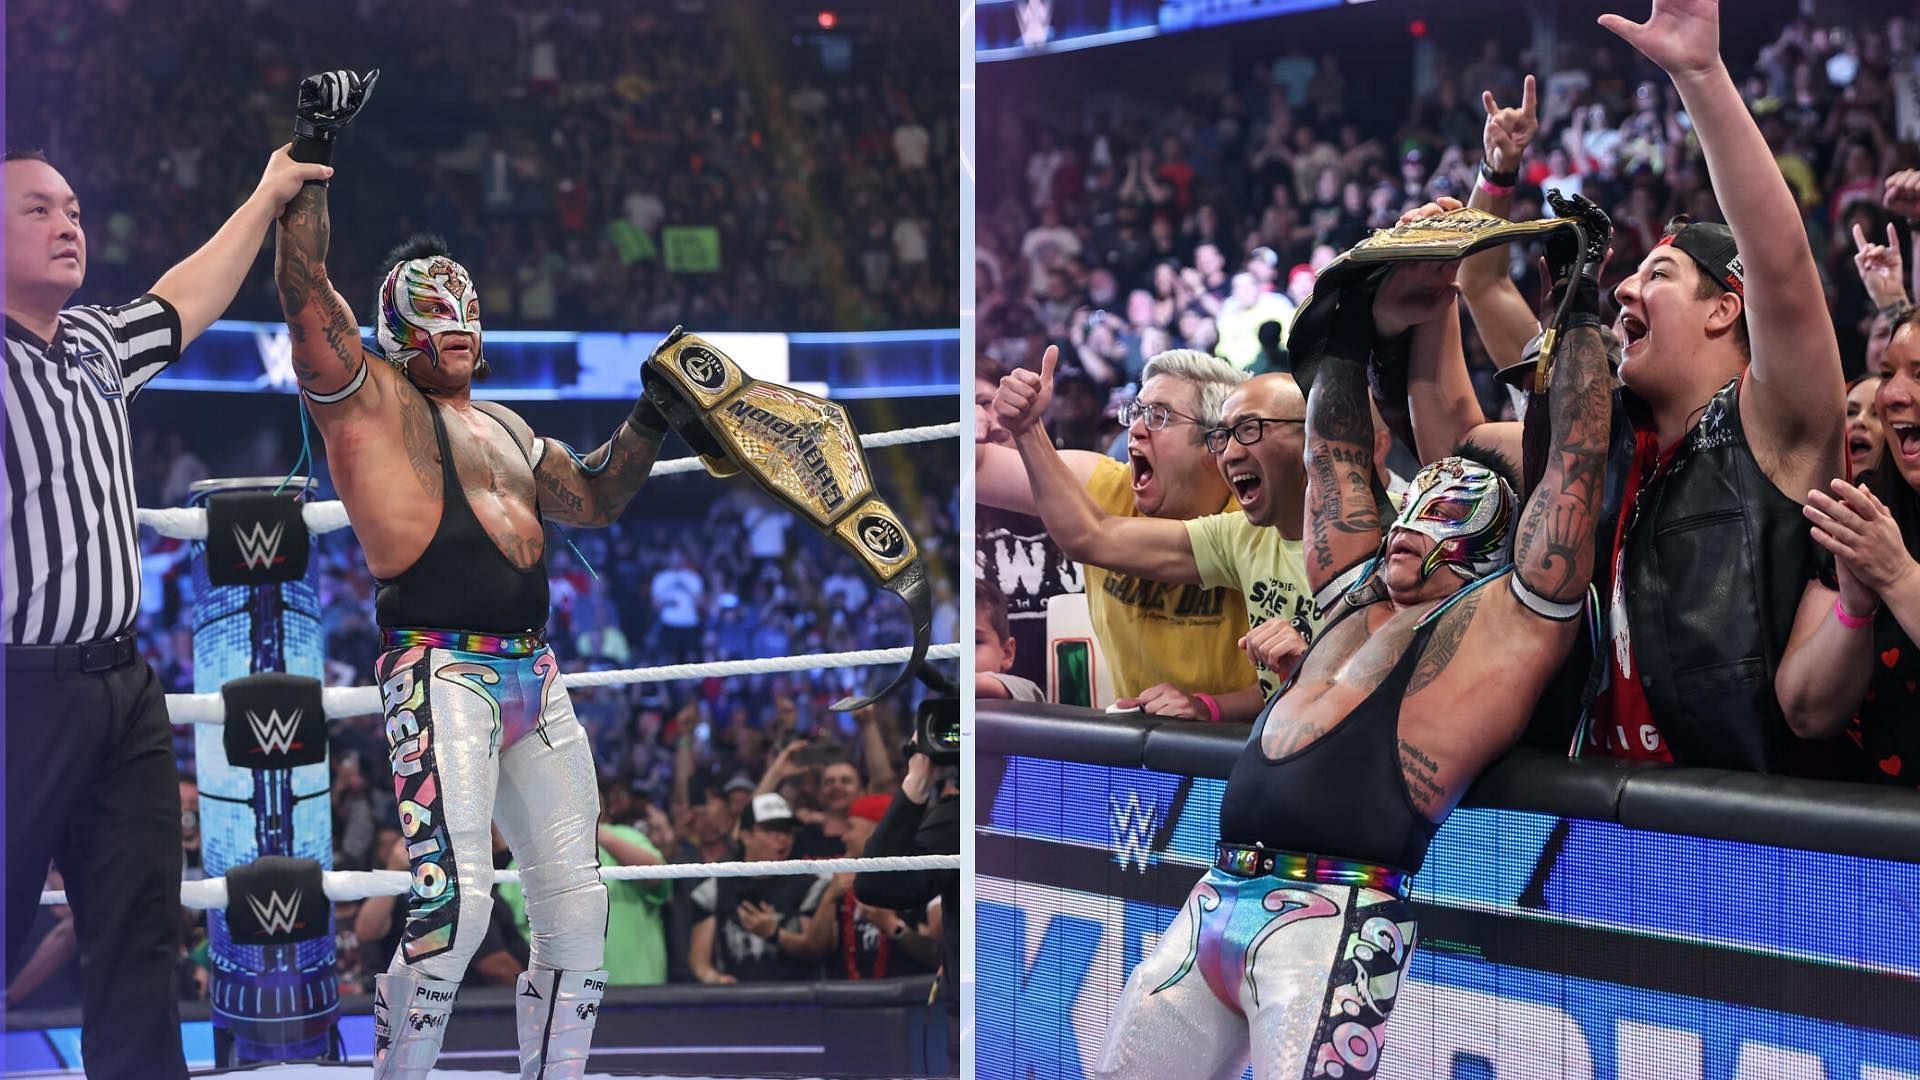 Rey Mysterio is the WWE United States Champion